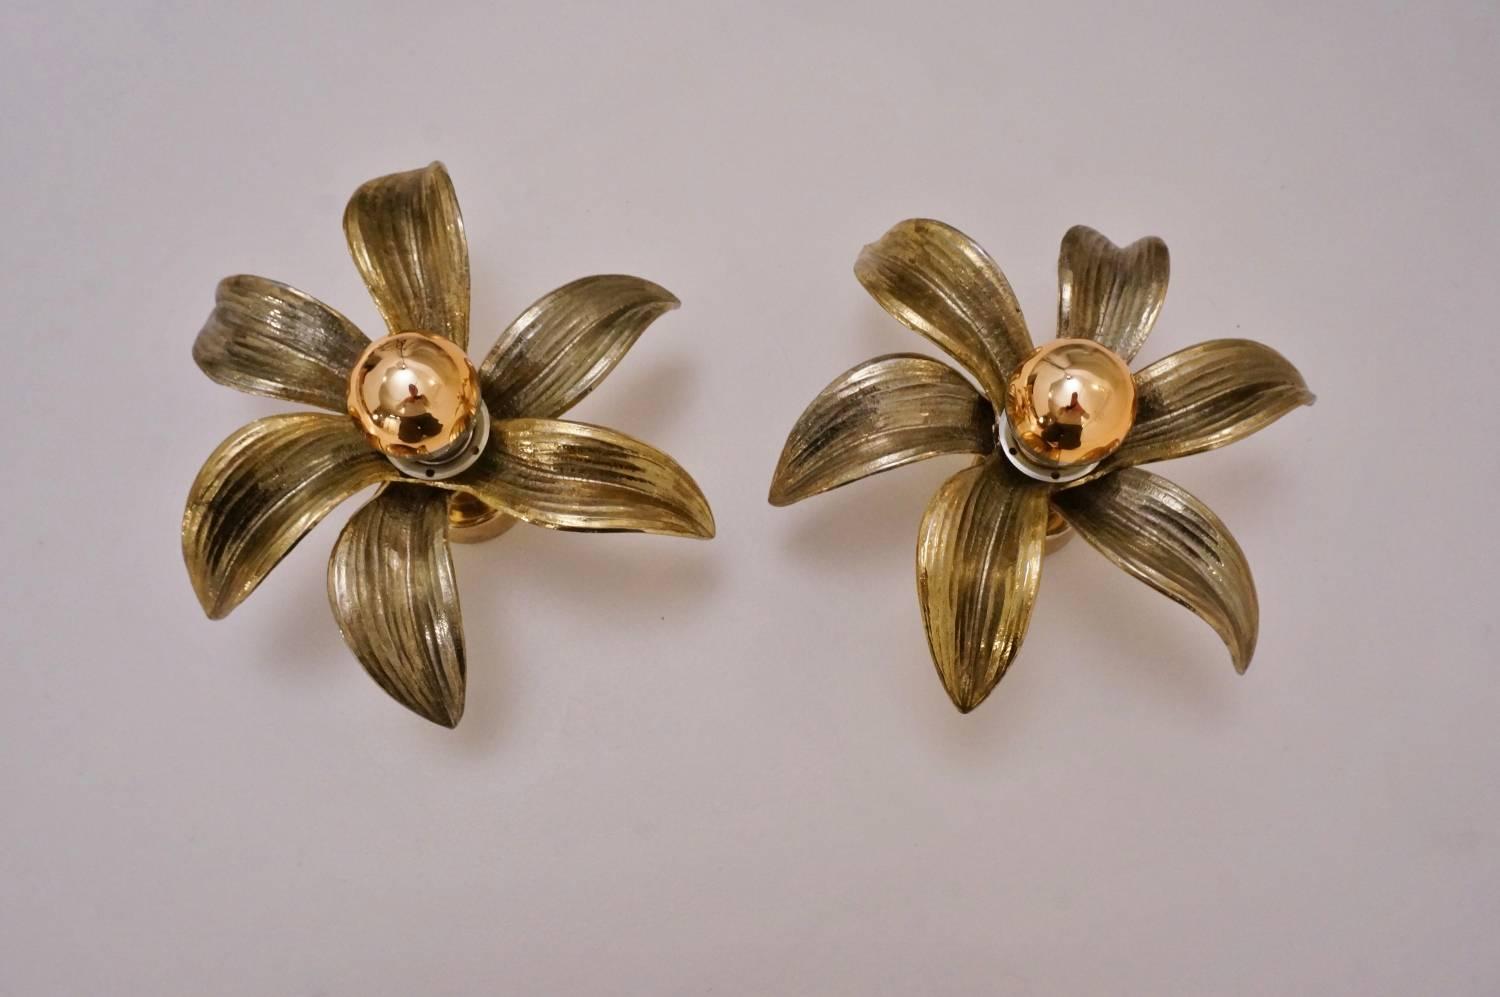 Brass flower wall lights, a pair by the Belgian lighting company 'Massive', circa 1970s.

These decorative sculptural wall lights consist of six quality cast naturalistic textured leaves on a brass gilt frame. The golden brass tone reflects a warm